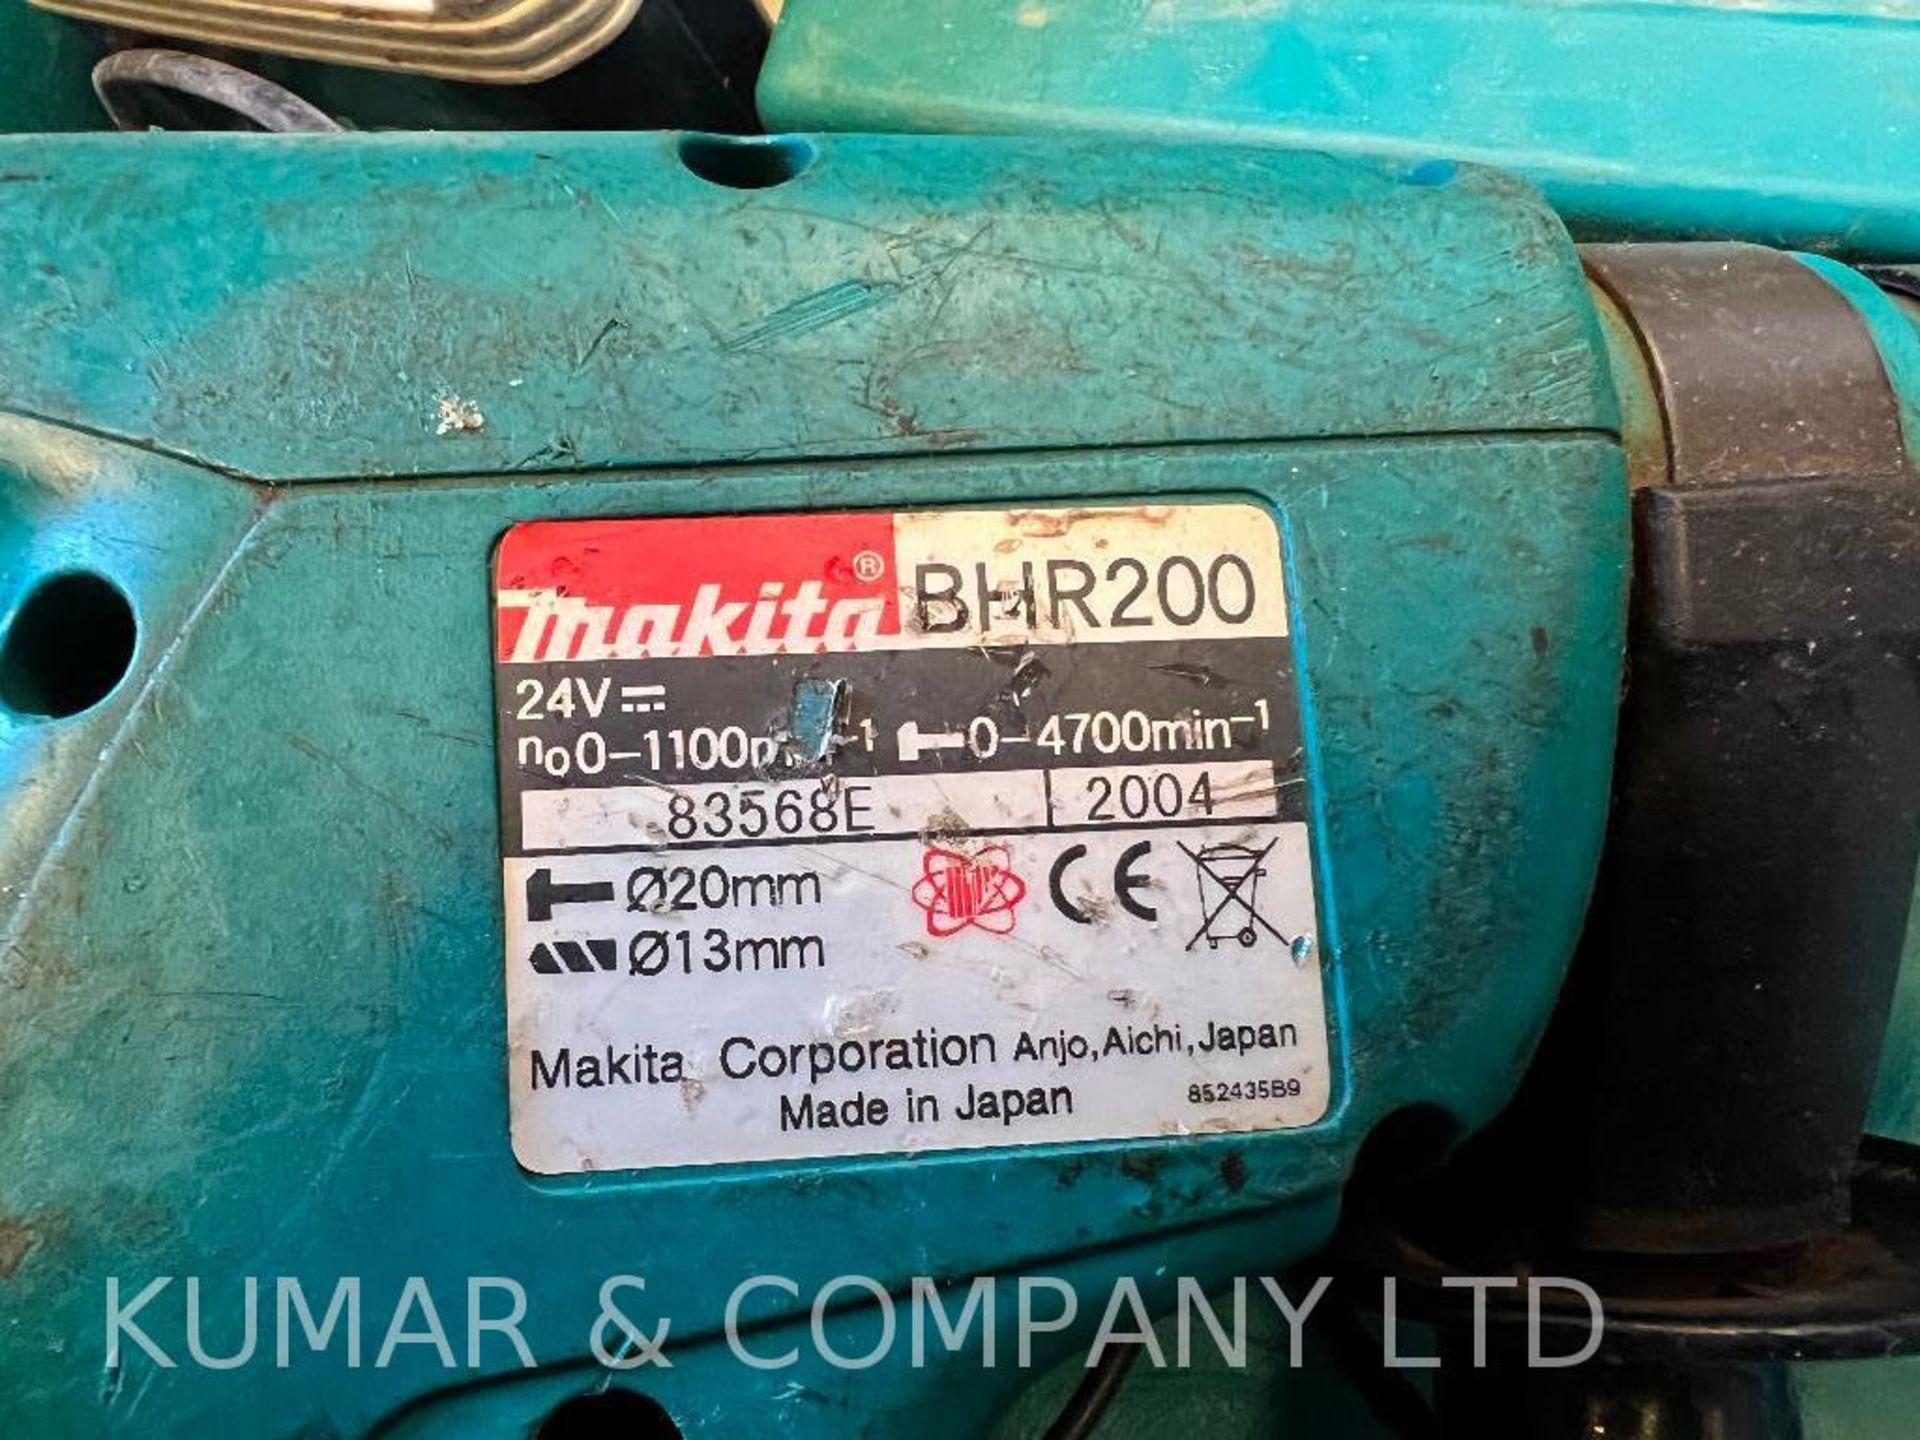 Makita BHR200 230v SDS Rotary Hammer Drill with Various Accessories in Case as Shown PLEASE NOTE: TH - Image 5 of 5